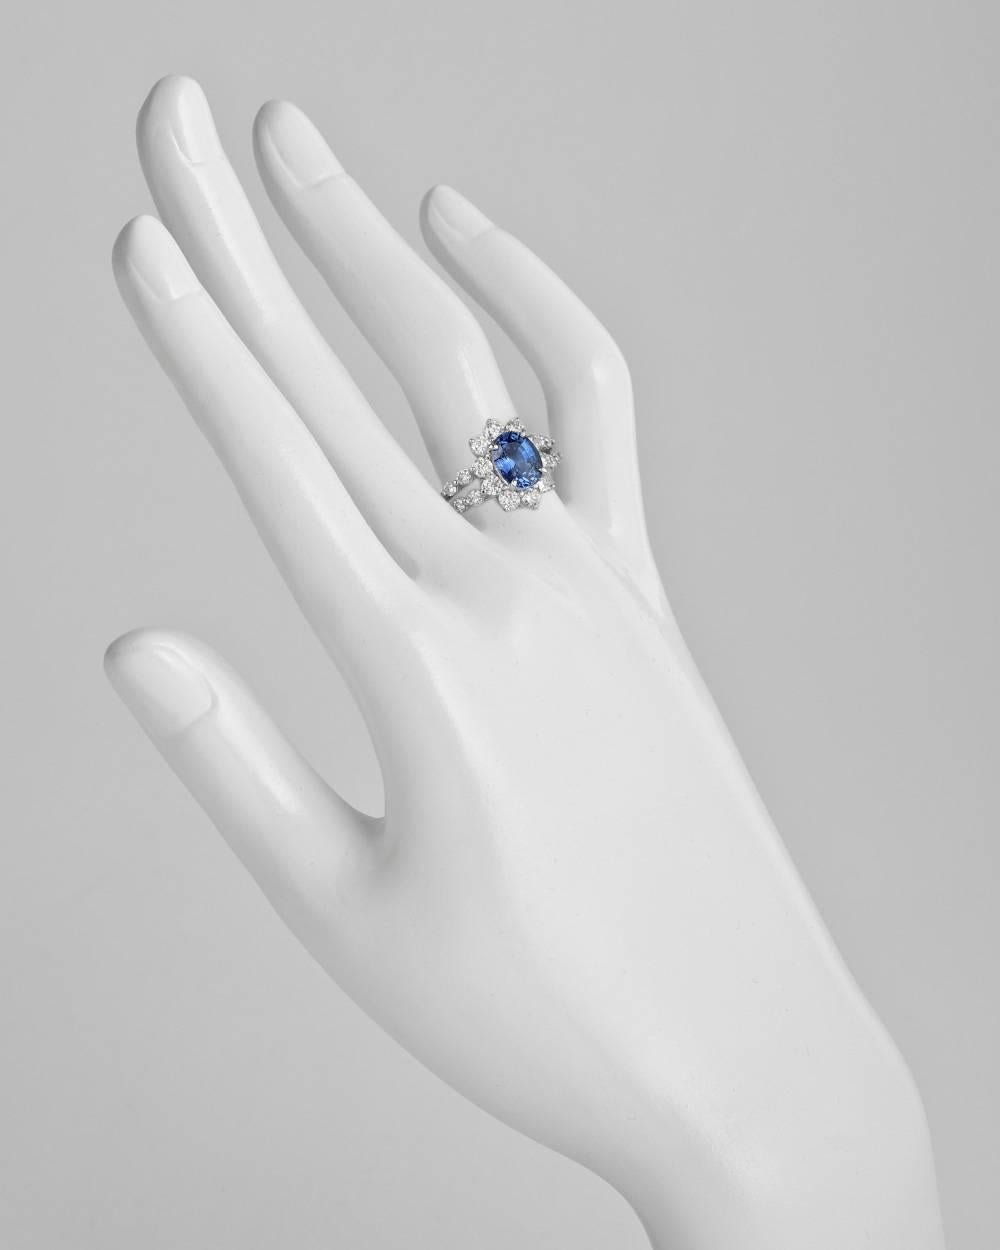 Sapphire and diamond cluster ring, centering an oval-shaped sapphire weighing approximately 2.31 carats, framed by a round-cut diamond surround and partway diamond-set split shank, the diamonds weighing approximately 1.21 total carats, mounted in .